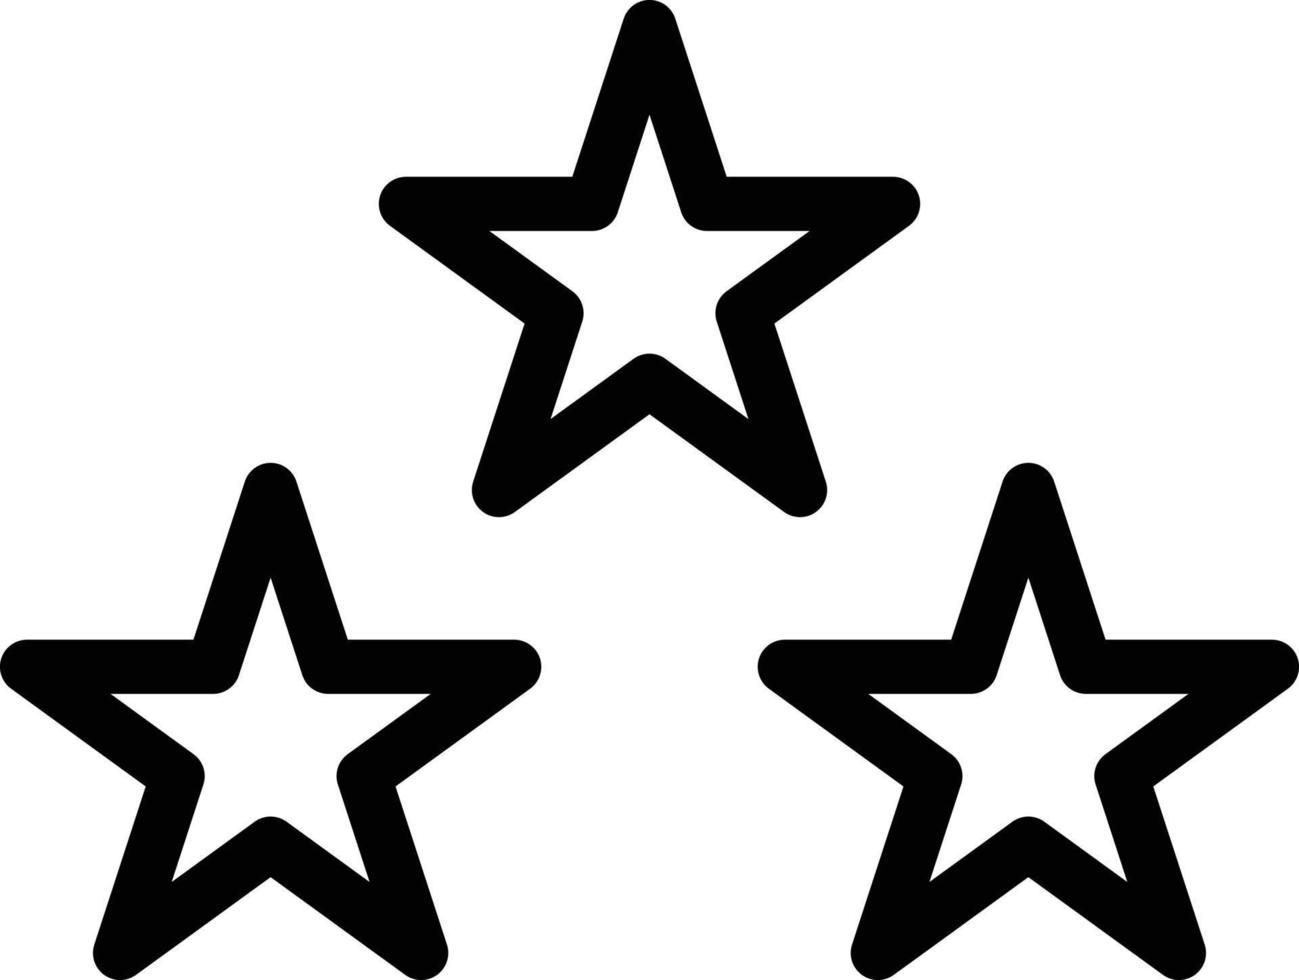 stars vector illustration on a background.Premium quality symbols.vector icons for concept and graphic design.